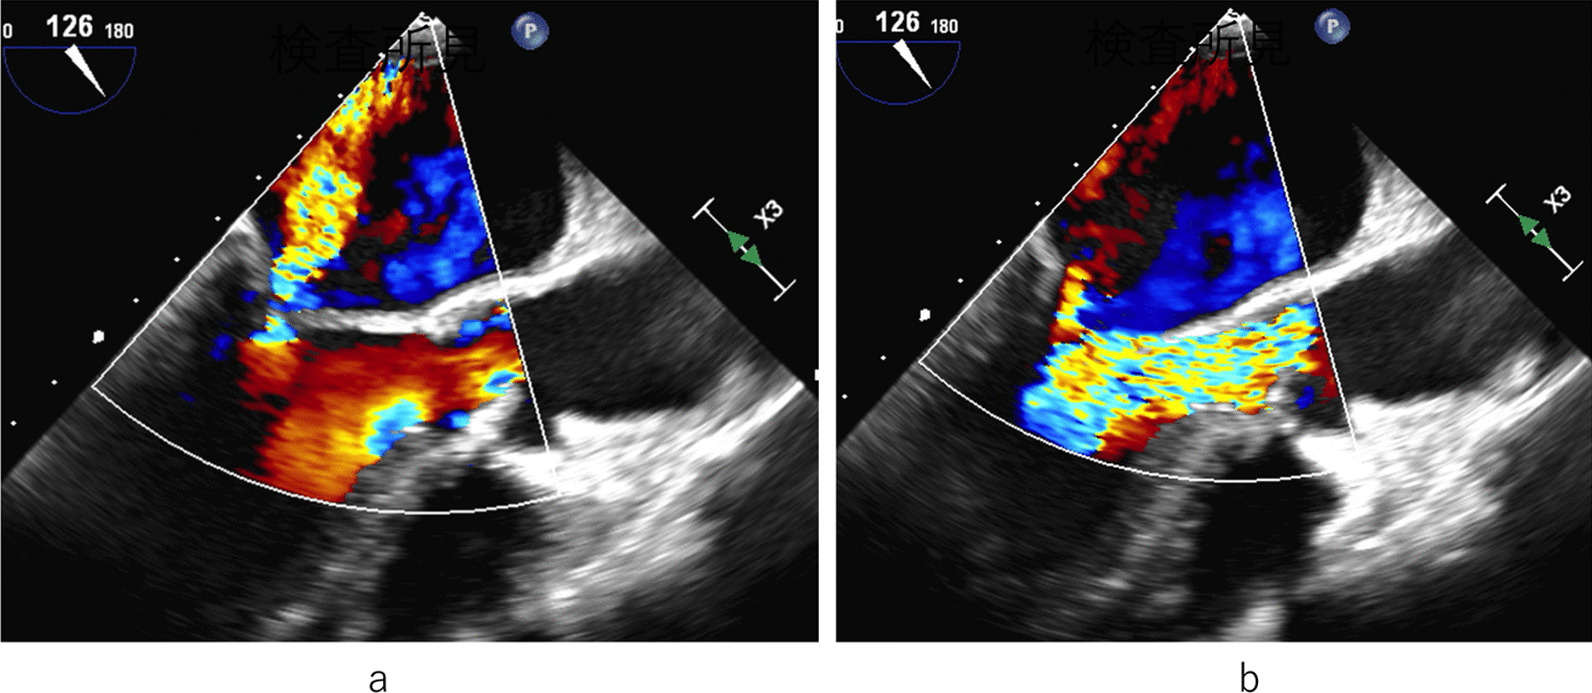 Totally endoscopic concomitant aortic and mitral valve surgery in junctional epidermolysis bullosa: a case report